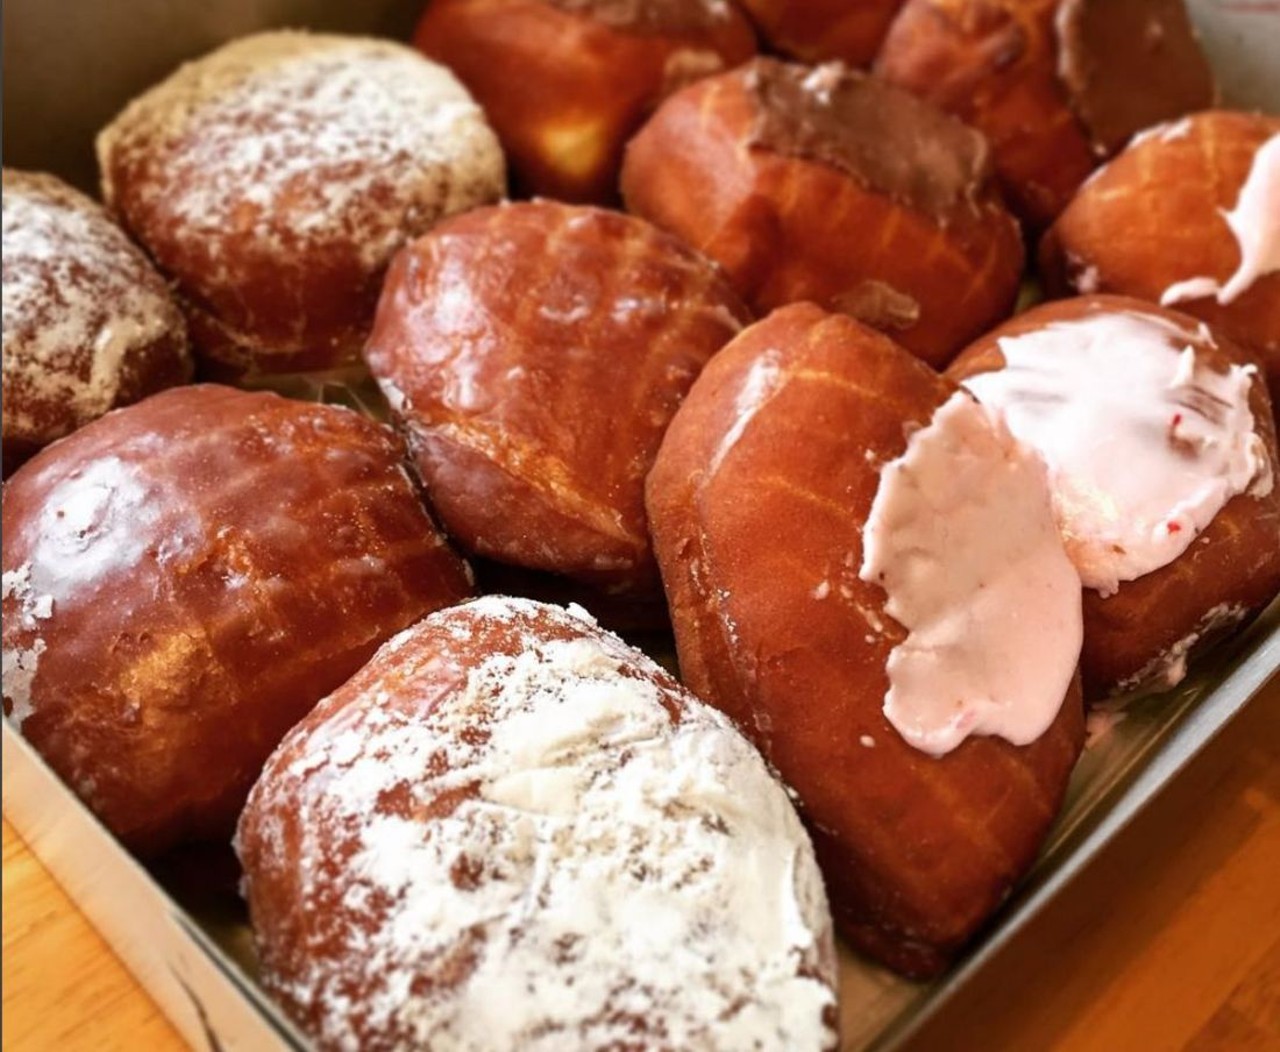 Dutch Girl Donuts
This Detroit donut shop is open 24 hours a day, but there will still be a line out the door come Fat Tuesday. There will likely be a wait, but it will be so worth it. 
19000 Woodward Ave., Detroit; 313-368-3020. Photo via Instagram user dblok90.